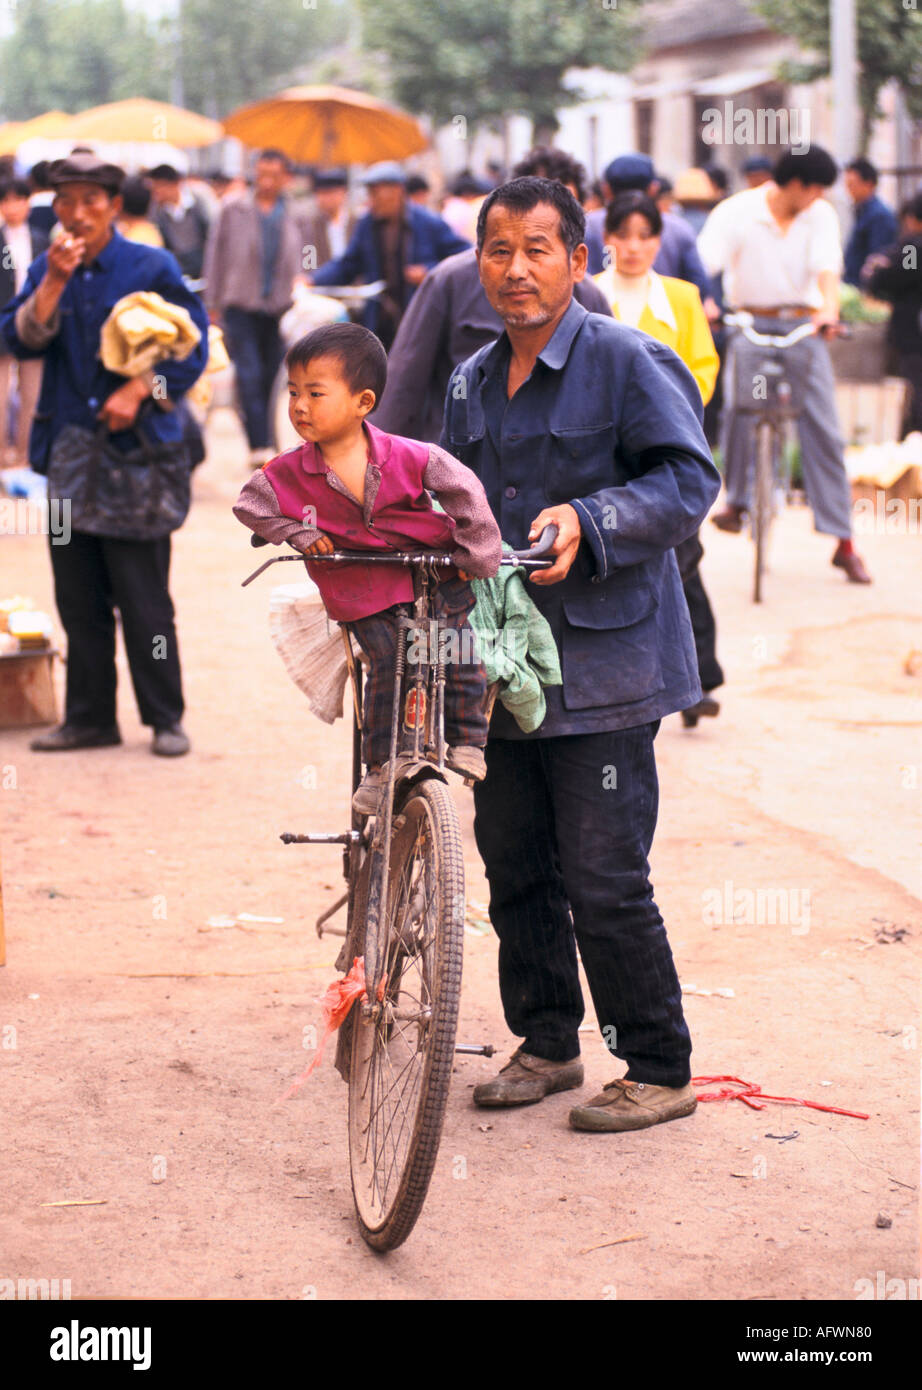 Anhui Province China 1990s. Liufu village rural community father child pedal bike returning from market. Chinese One Child Policy 1998 HOMER SYKES Stock Photo